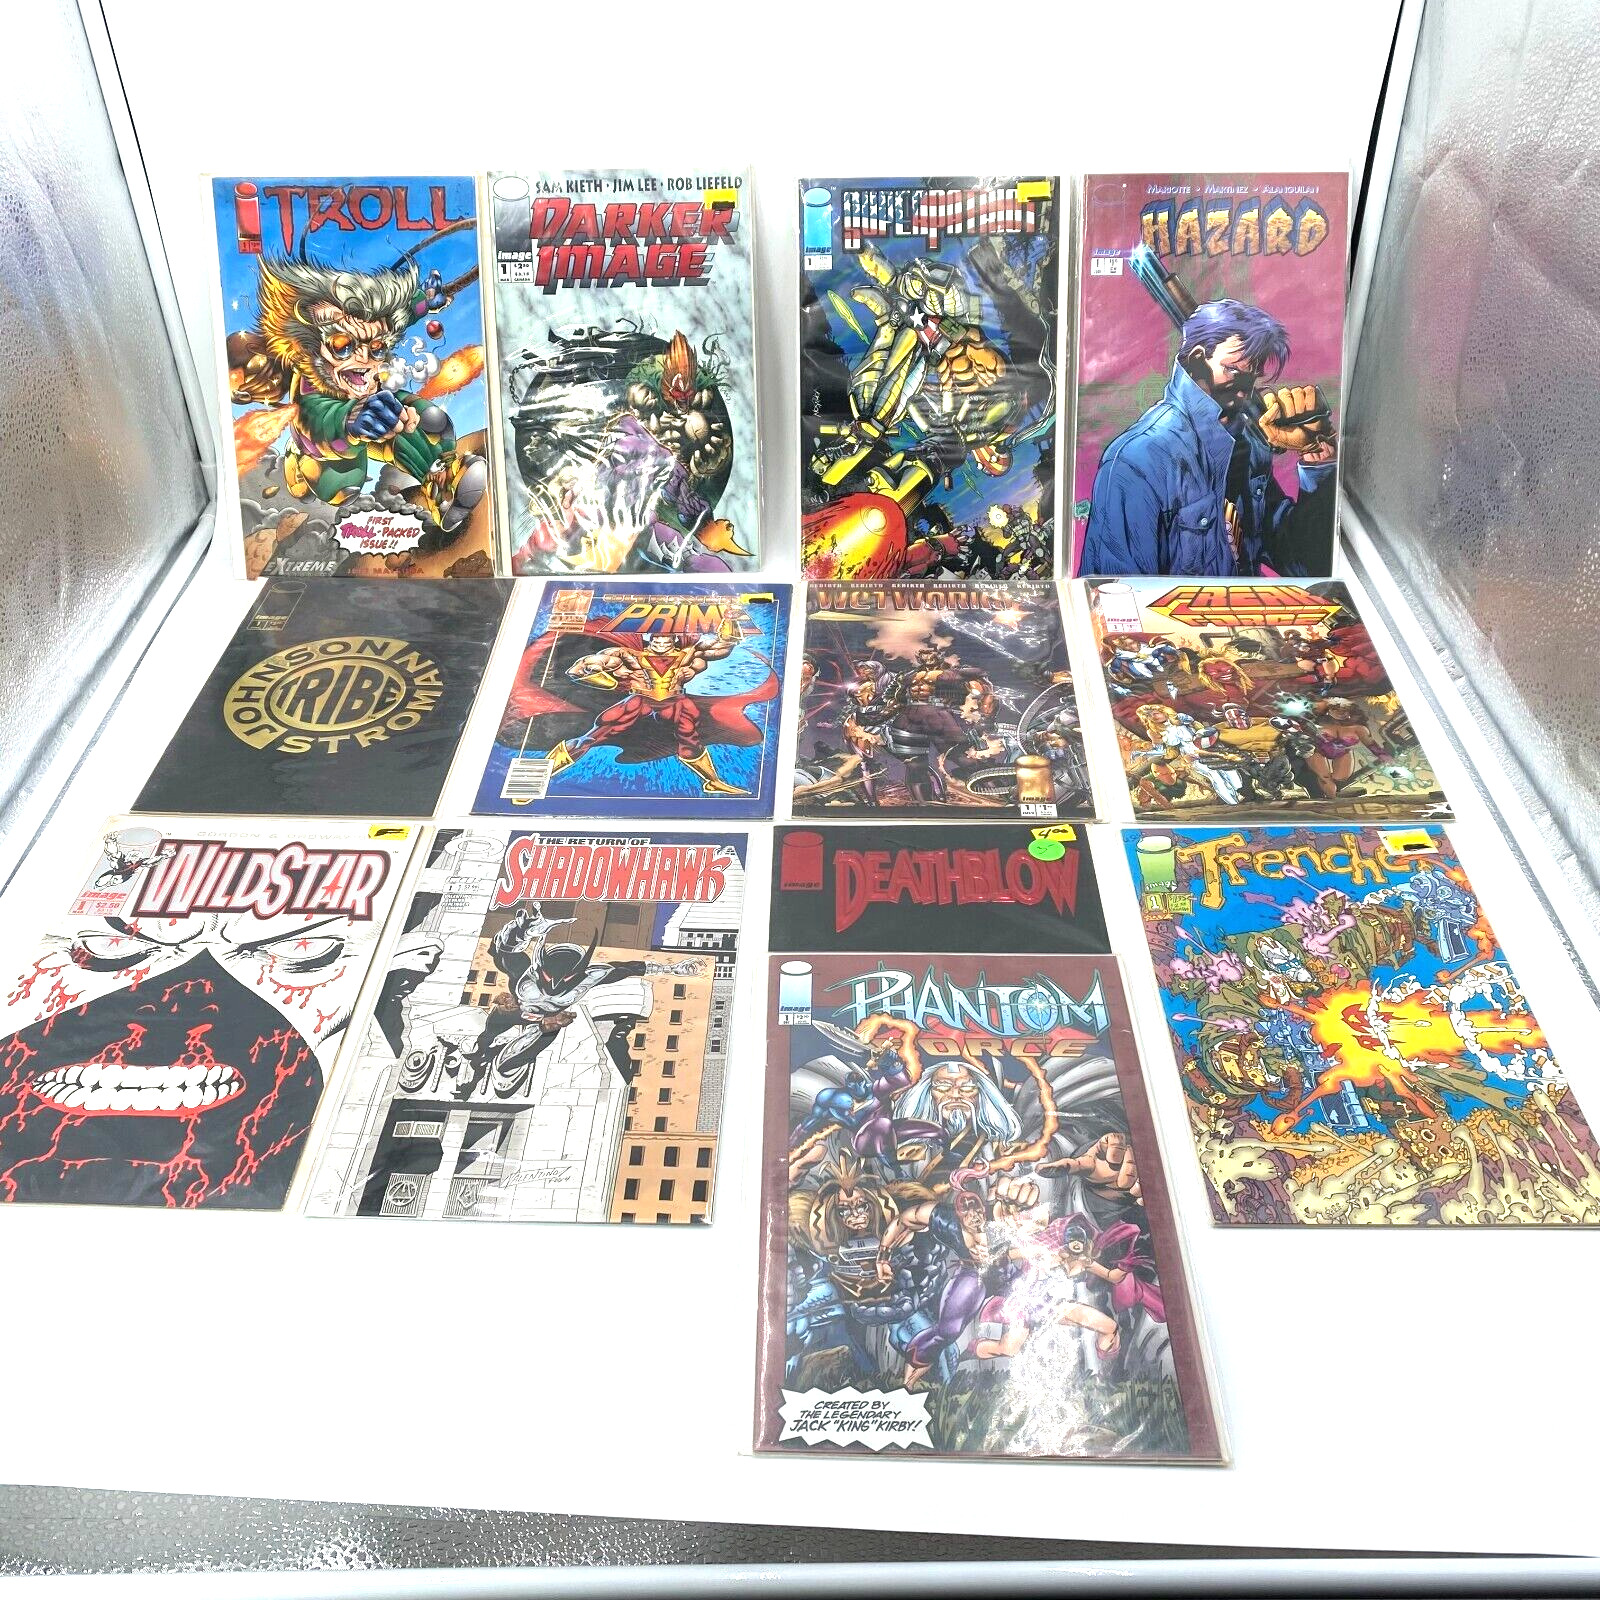 13 #1's Image Comics. ALL FIRST ISSUES Shadowhawk, Wildstar, Wetworks, more LOT